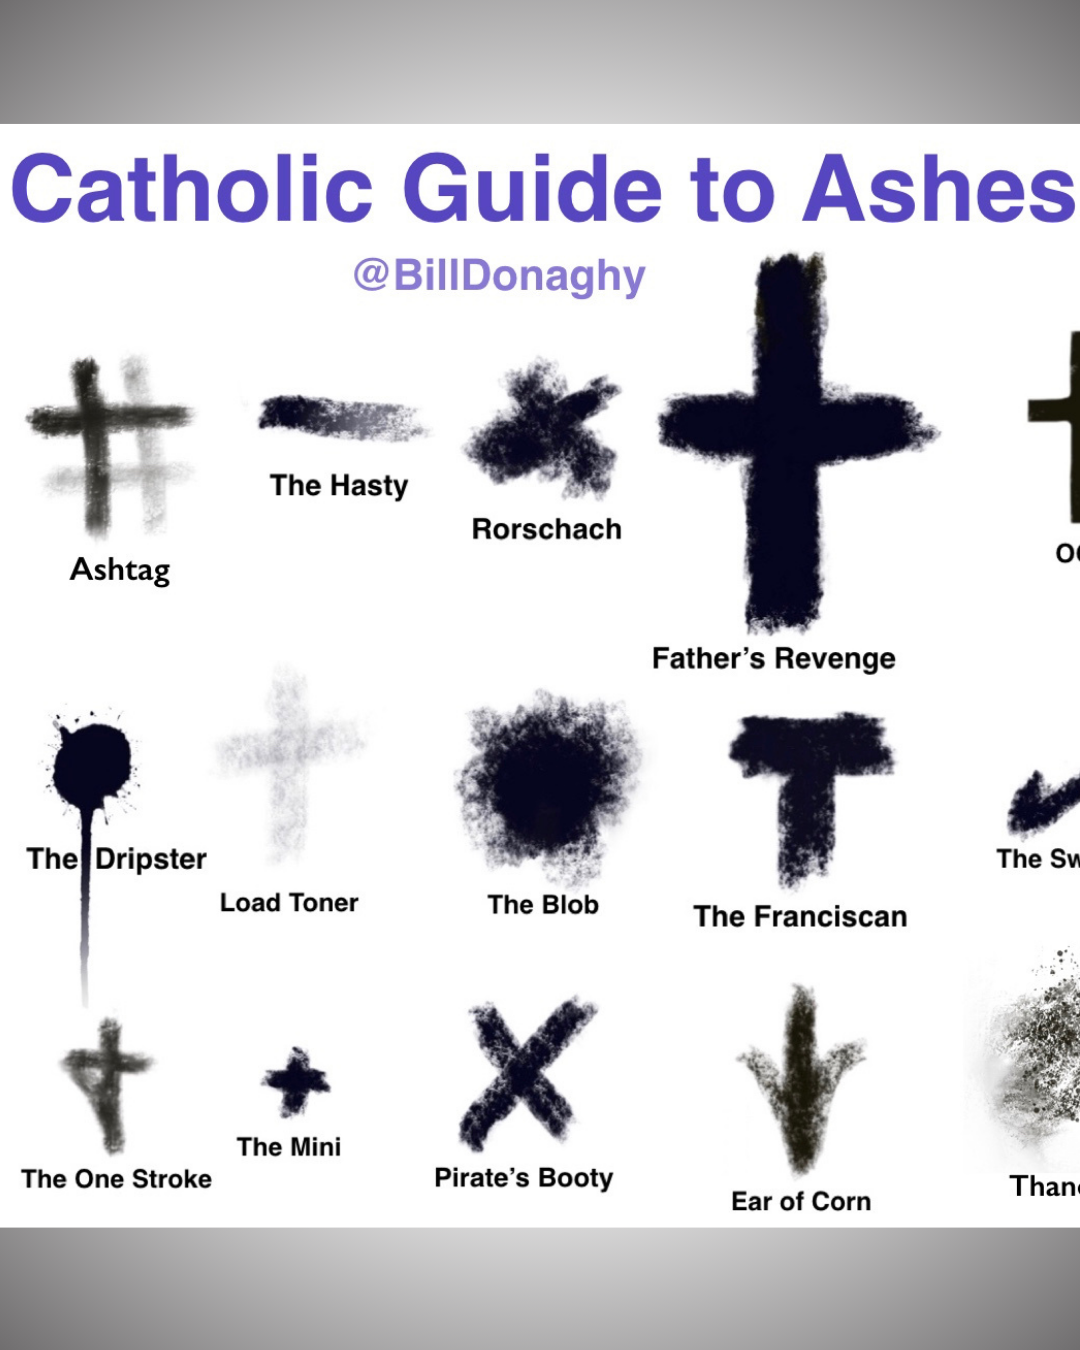  ash wednesday significance, ash wednesday meaning, What is Ash Wednesday? ash wednesday meaning, ash wednesday definition